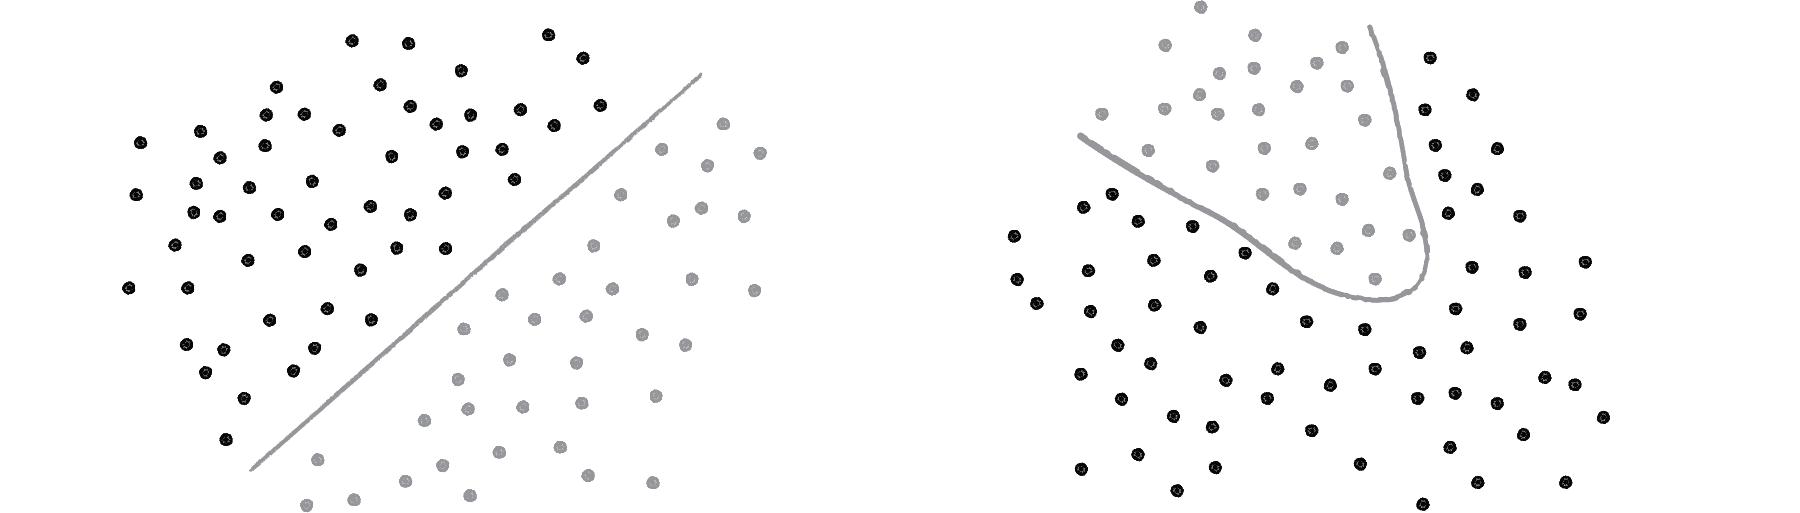 Figure 10.10: The collection of points on the left is linearly separable. The data on the right is nonlinearly separable; a curve is required to separate the points.